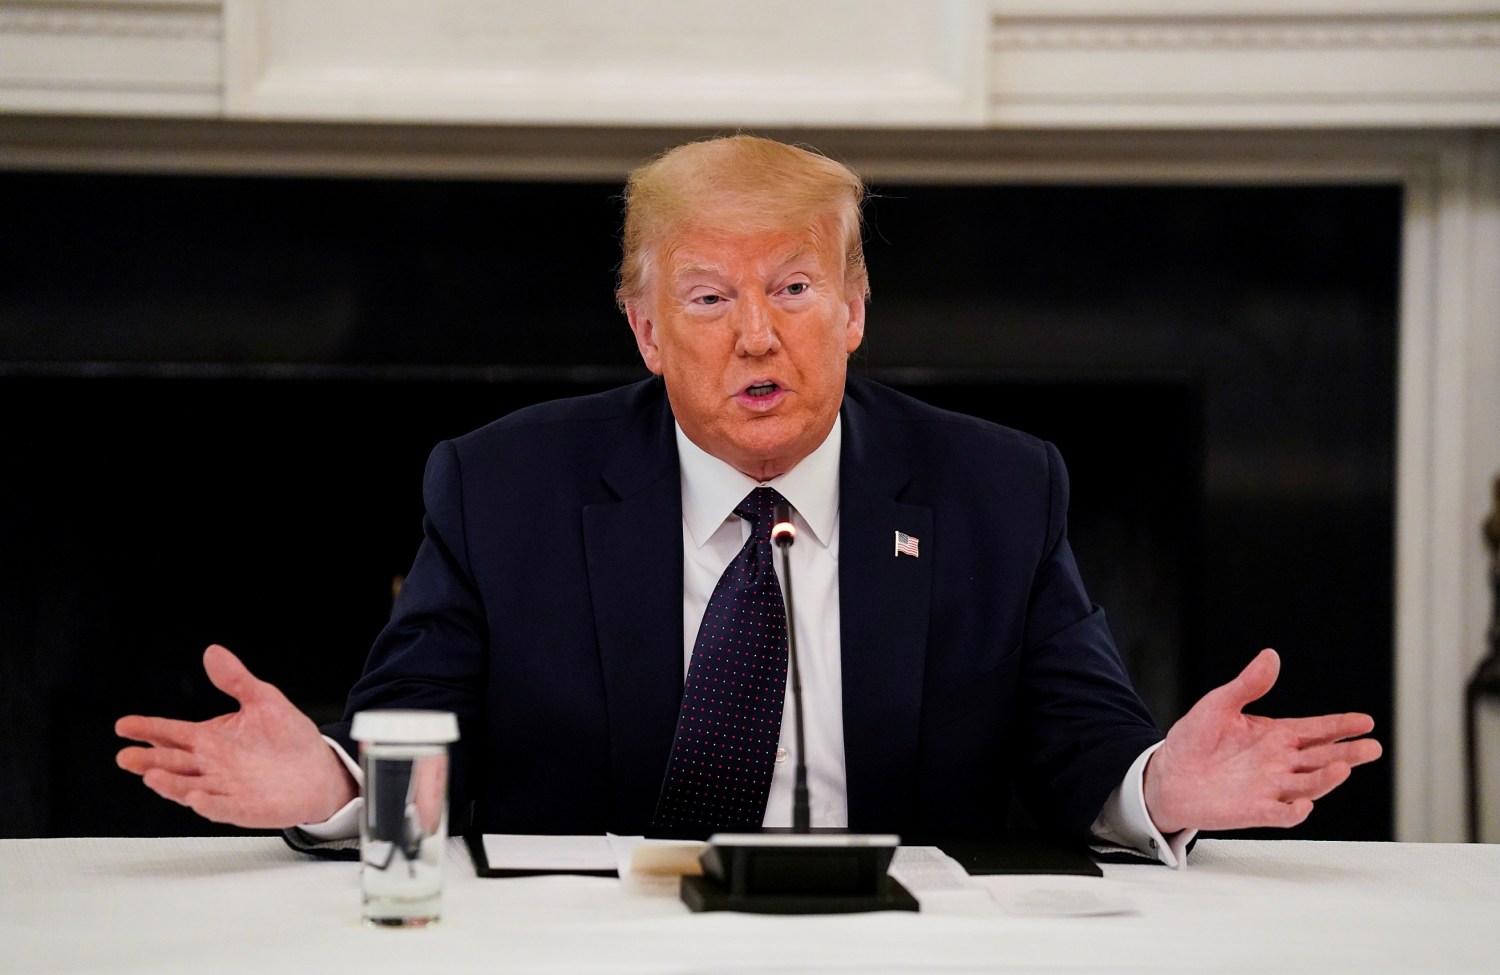 U.S. President Donald Trump speaks during a roundtable discussion with law enforcement in the State Dining Room at the White House in Washington, U.S., June 8, 2020. REUTERS/Kevin Lamarque